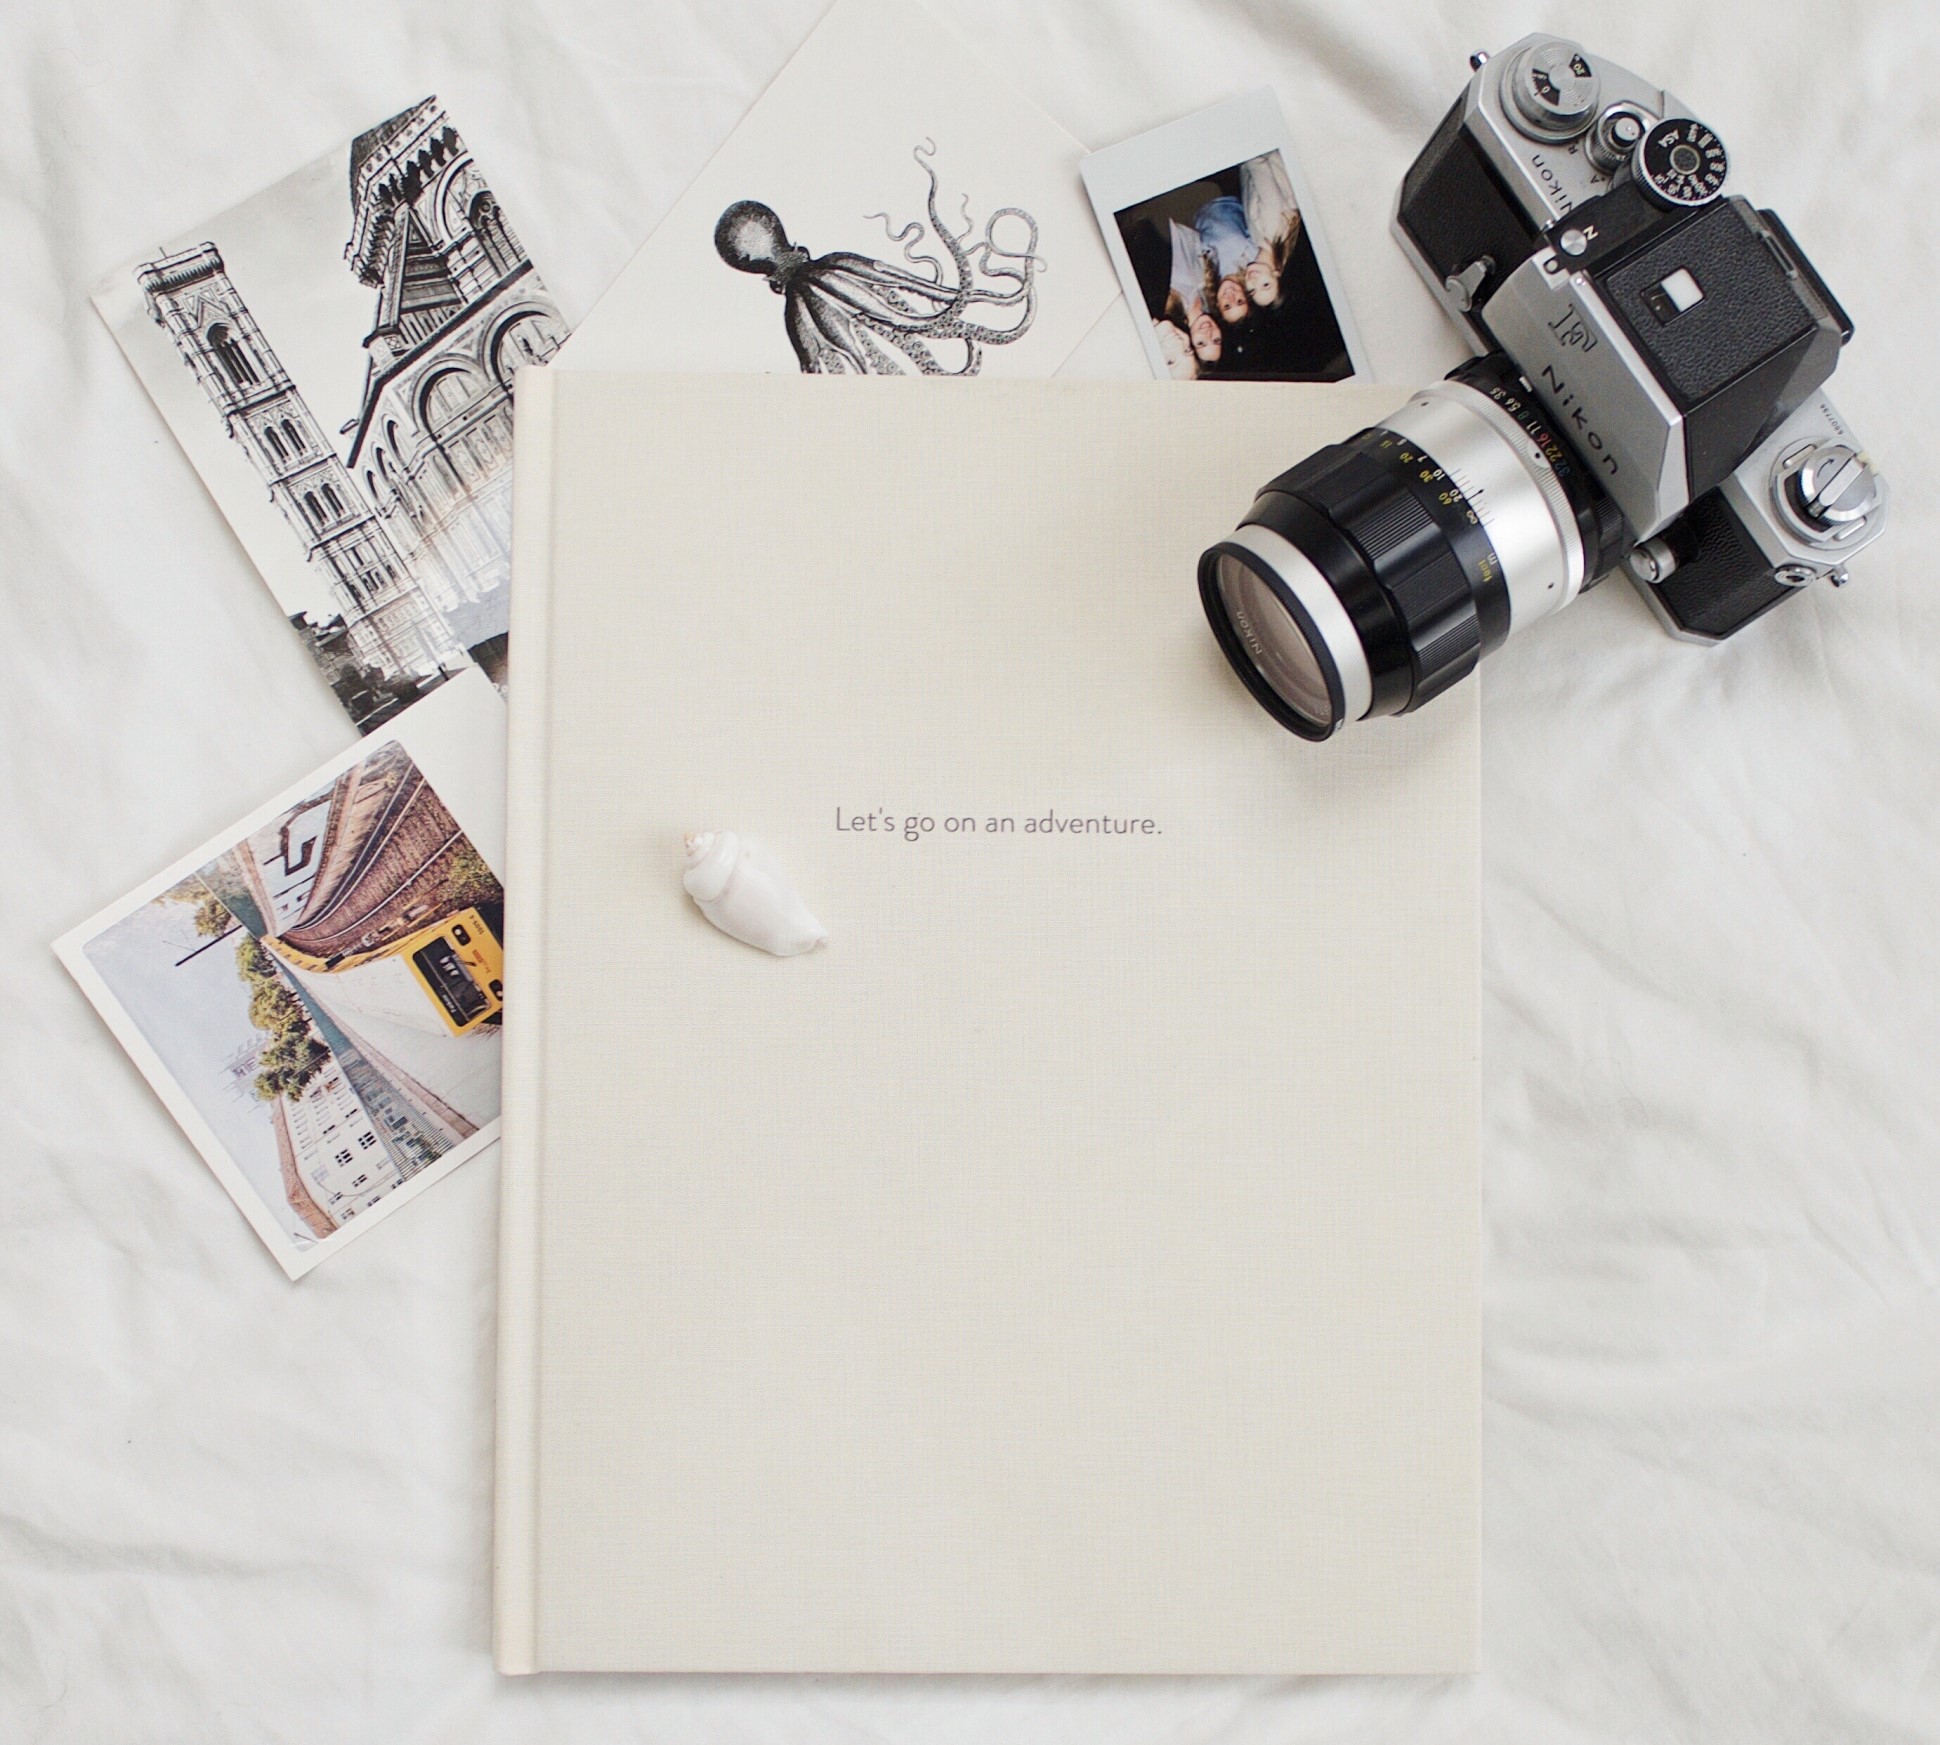 Flatlay of camera, photo book and sketches.